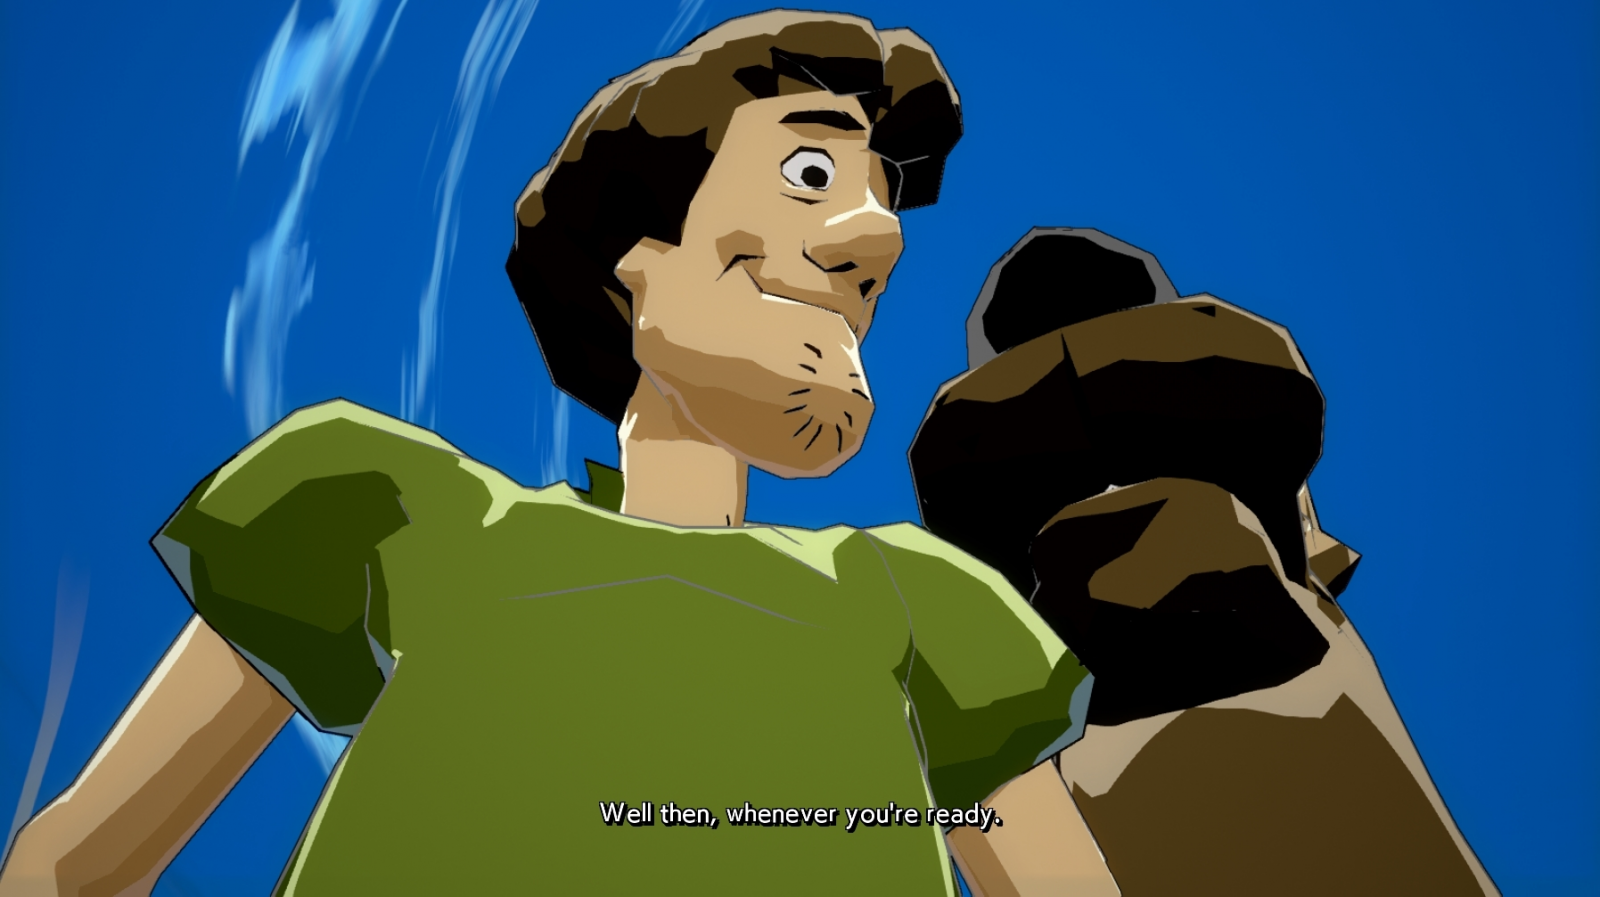 Shaggy will find his way into you mods somehow OwO. 